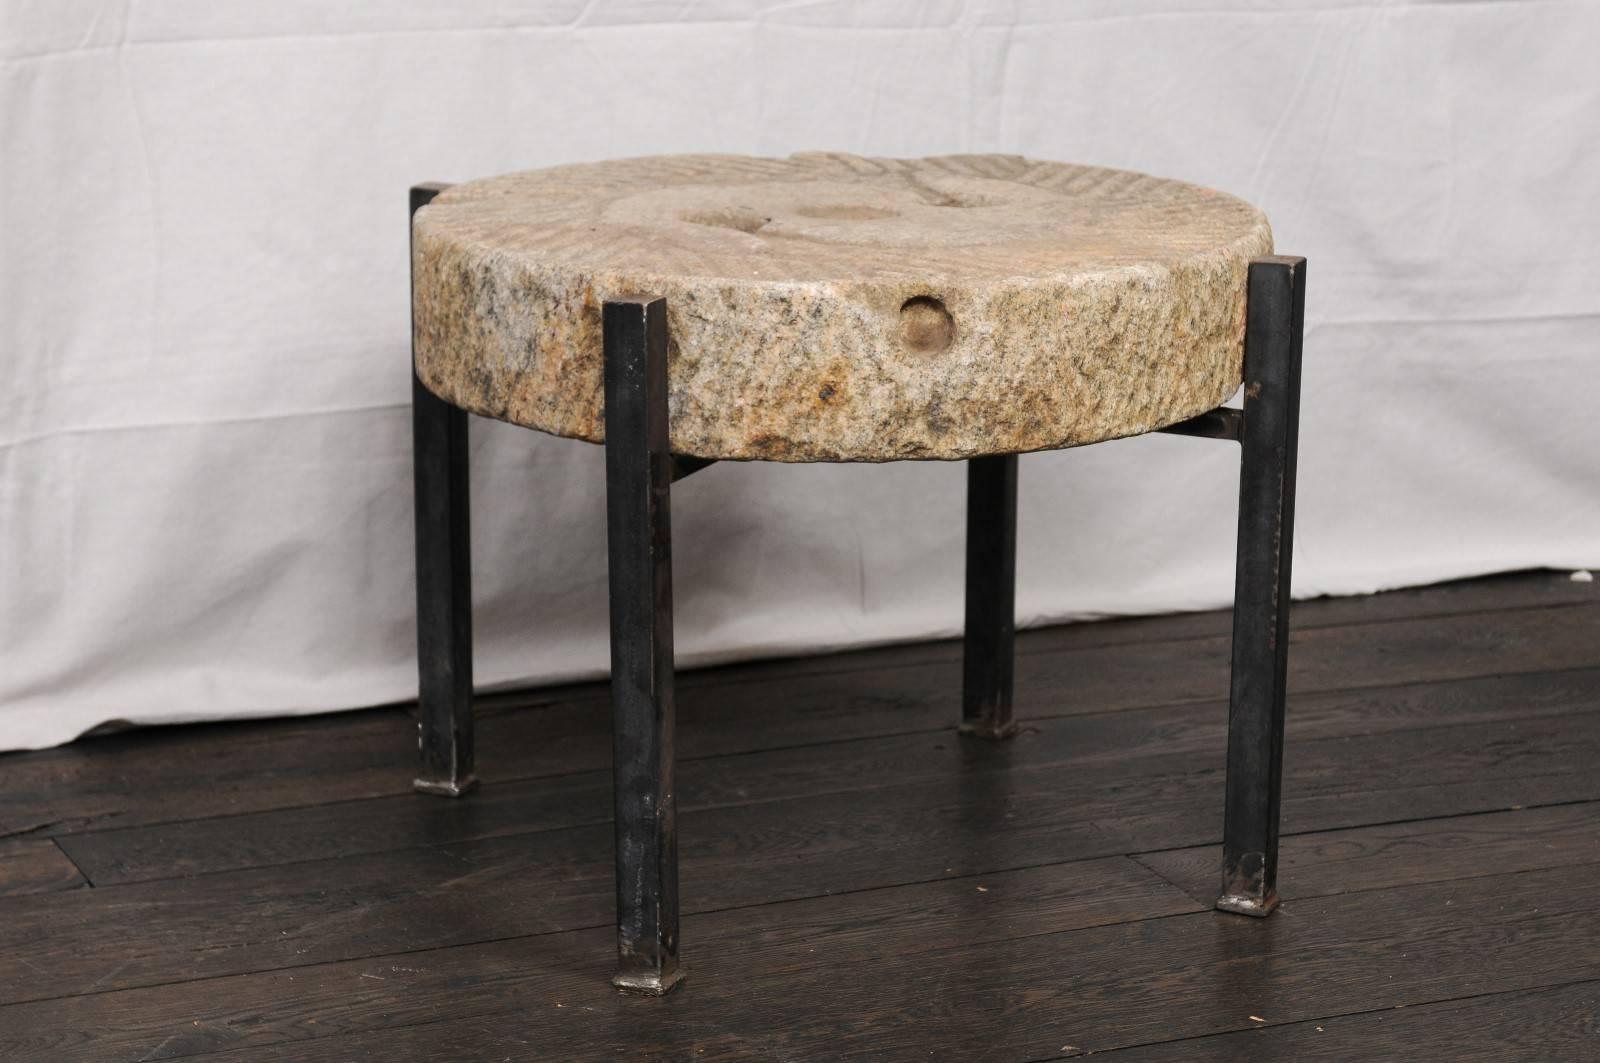 A 19th century European millstone grinding table. This fantastic little drinks table features an antique milling and grinding stone which rests upon a new, custom, black iron base. This stone has lovely texture and ridges, and was originally used in